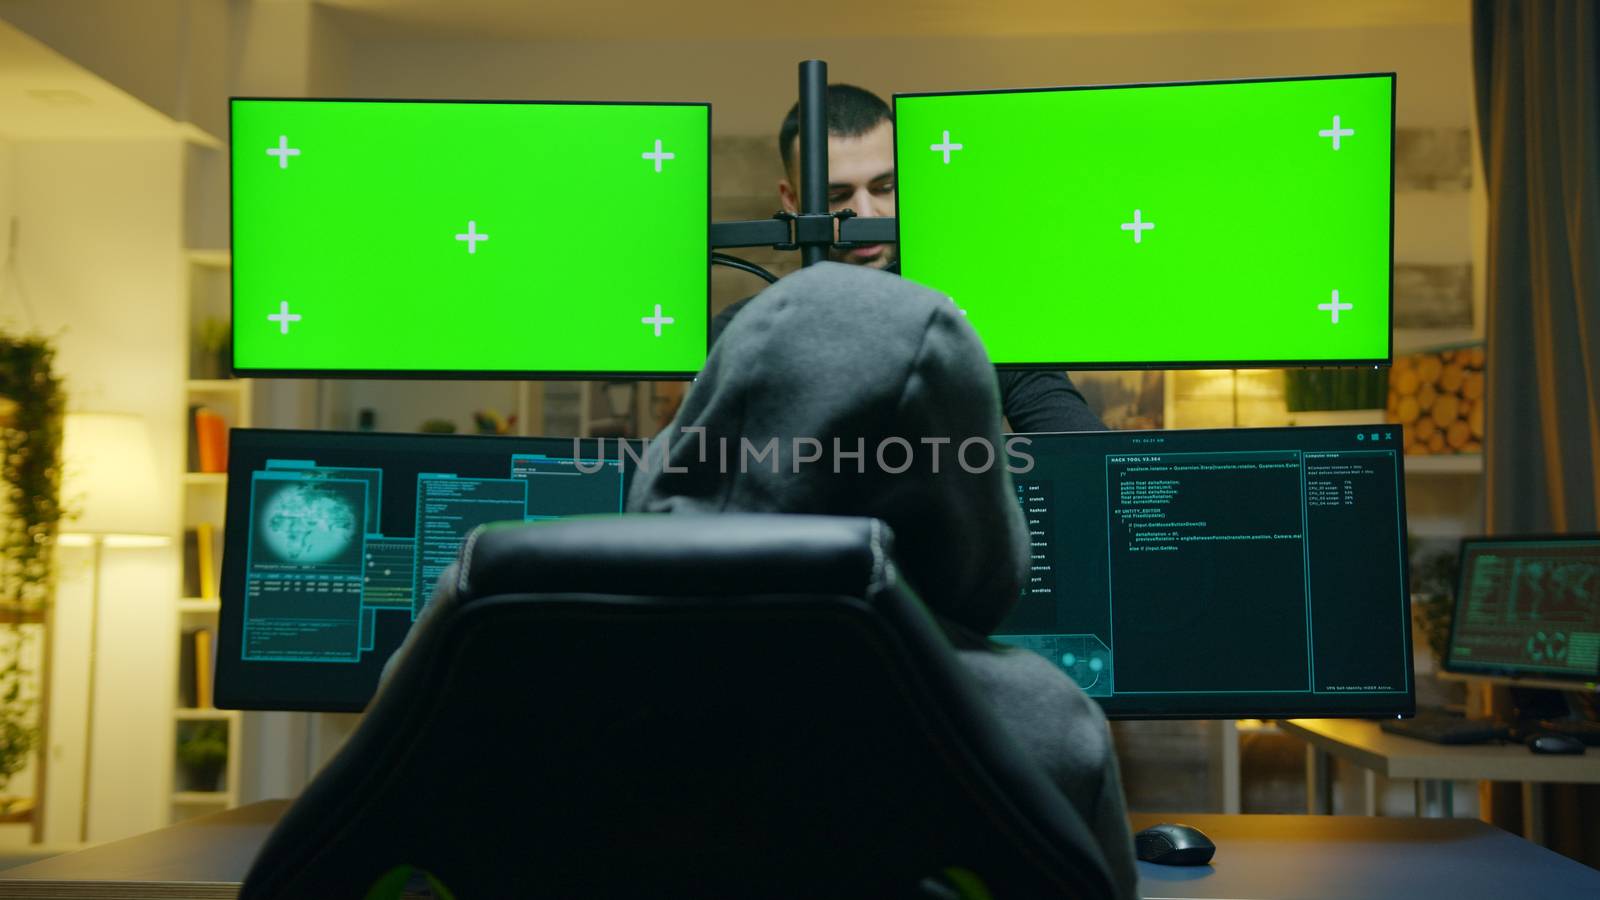 Team of hackers using computer with green screen mockup to steal secret information from the government.